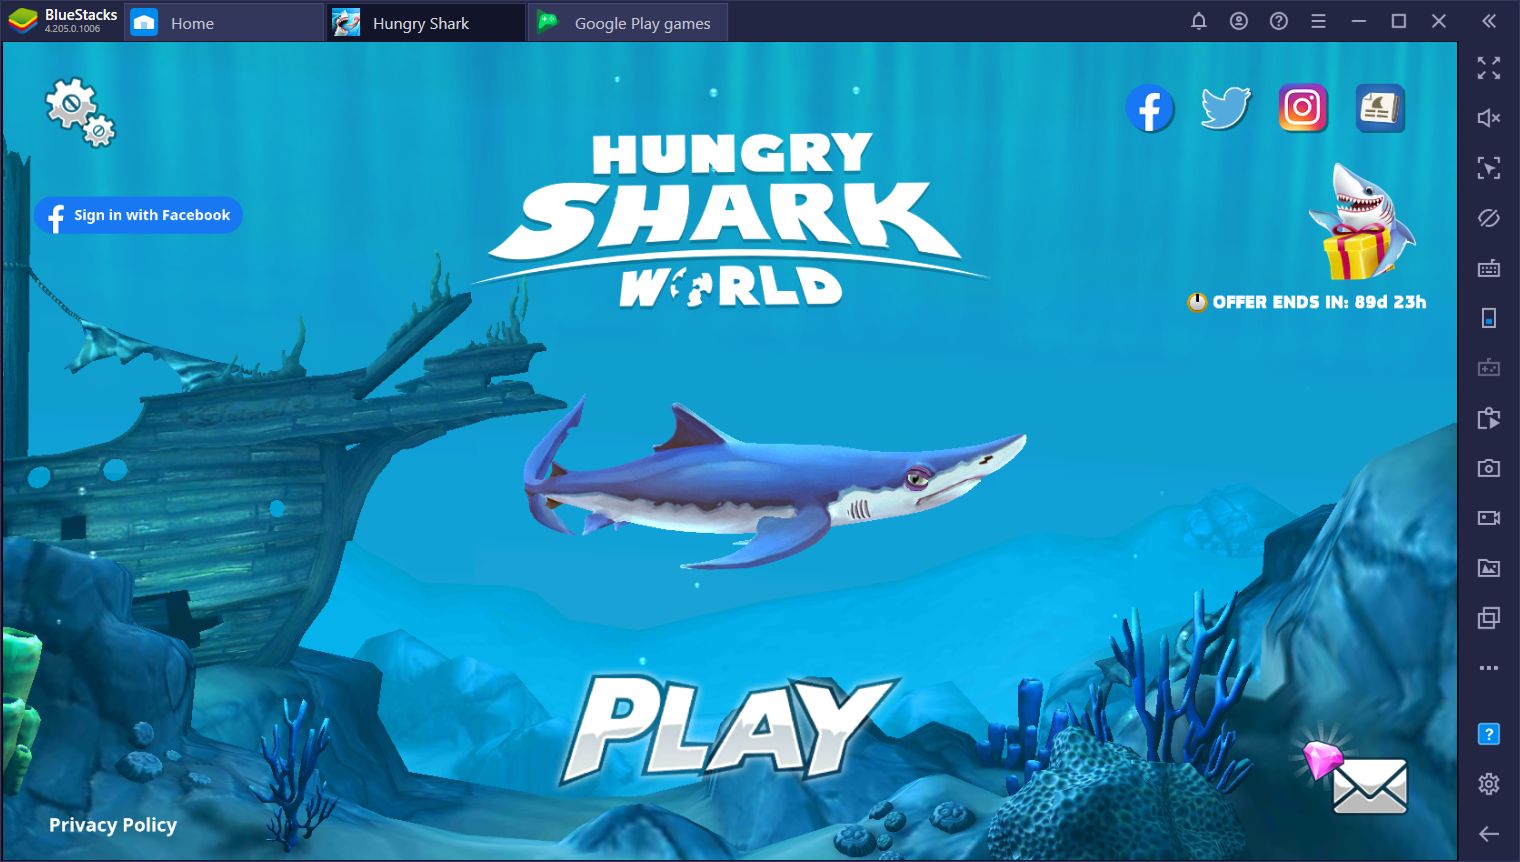 How to Play Hungry Shark World on PC